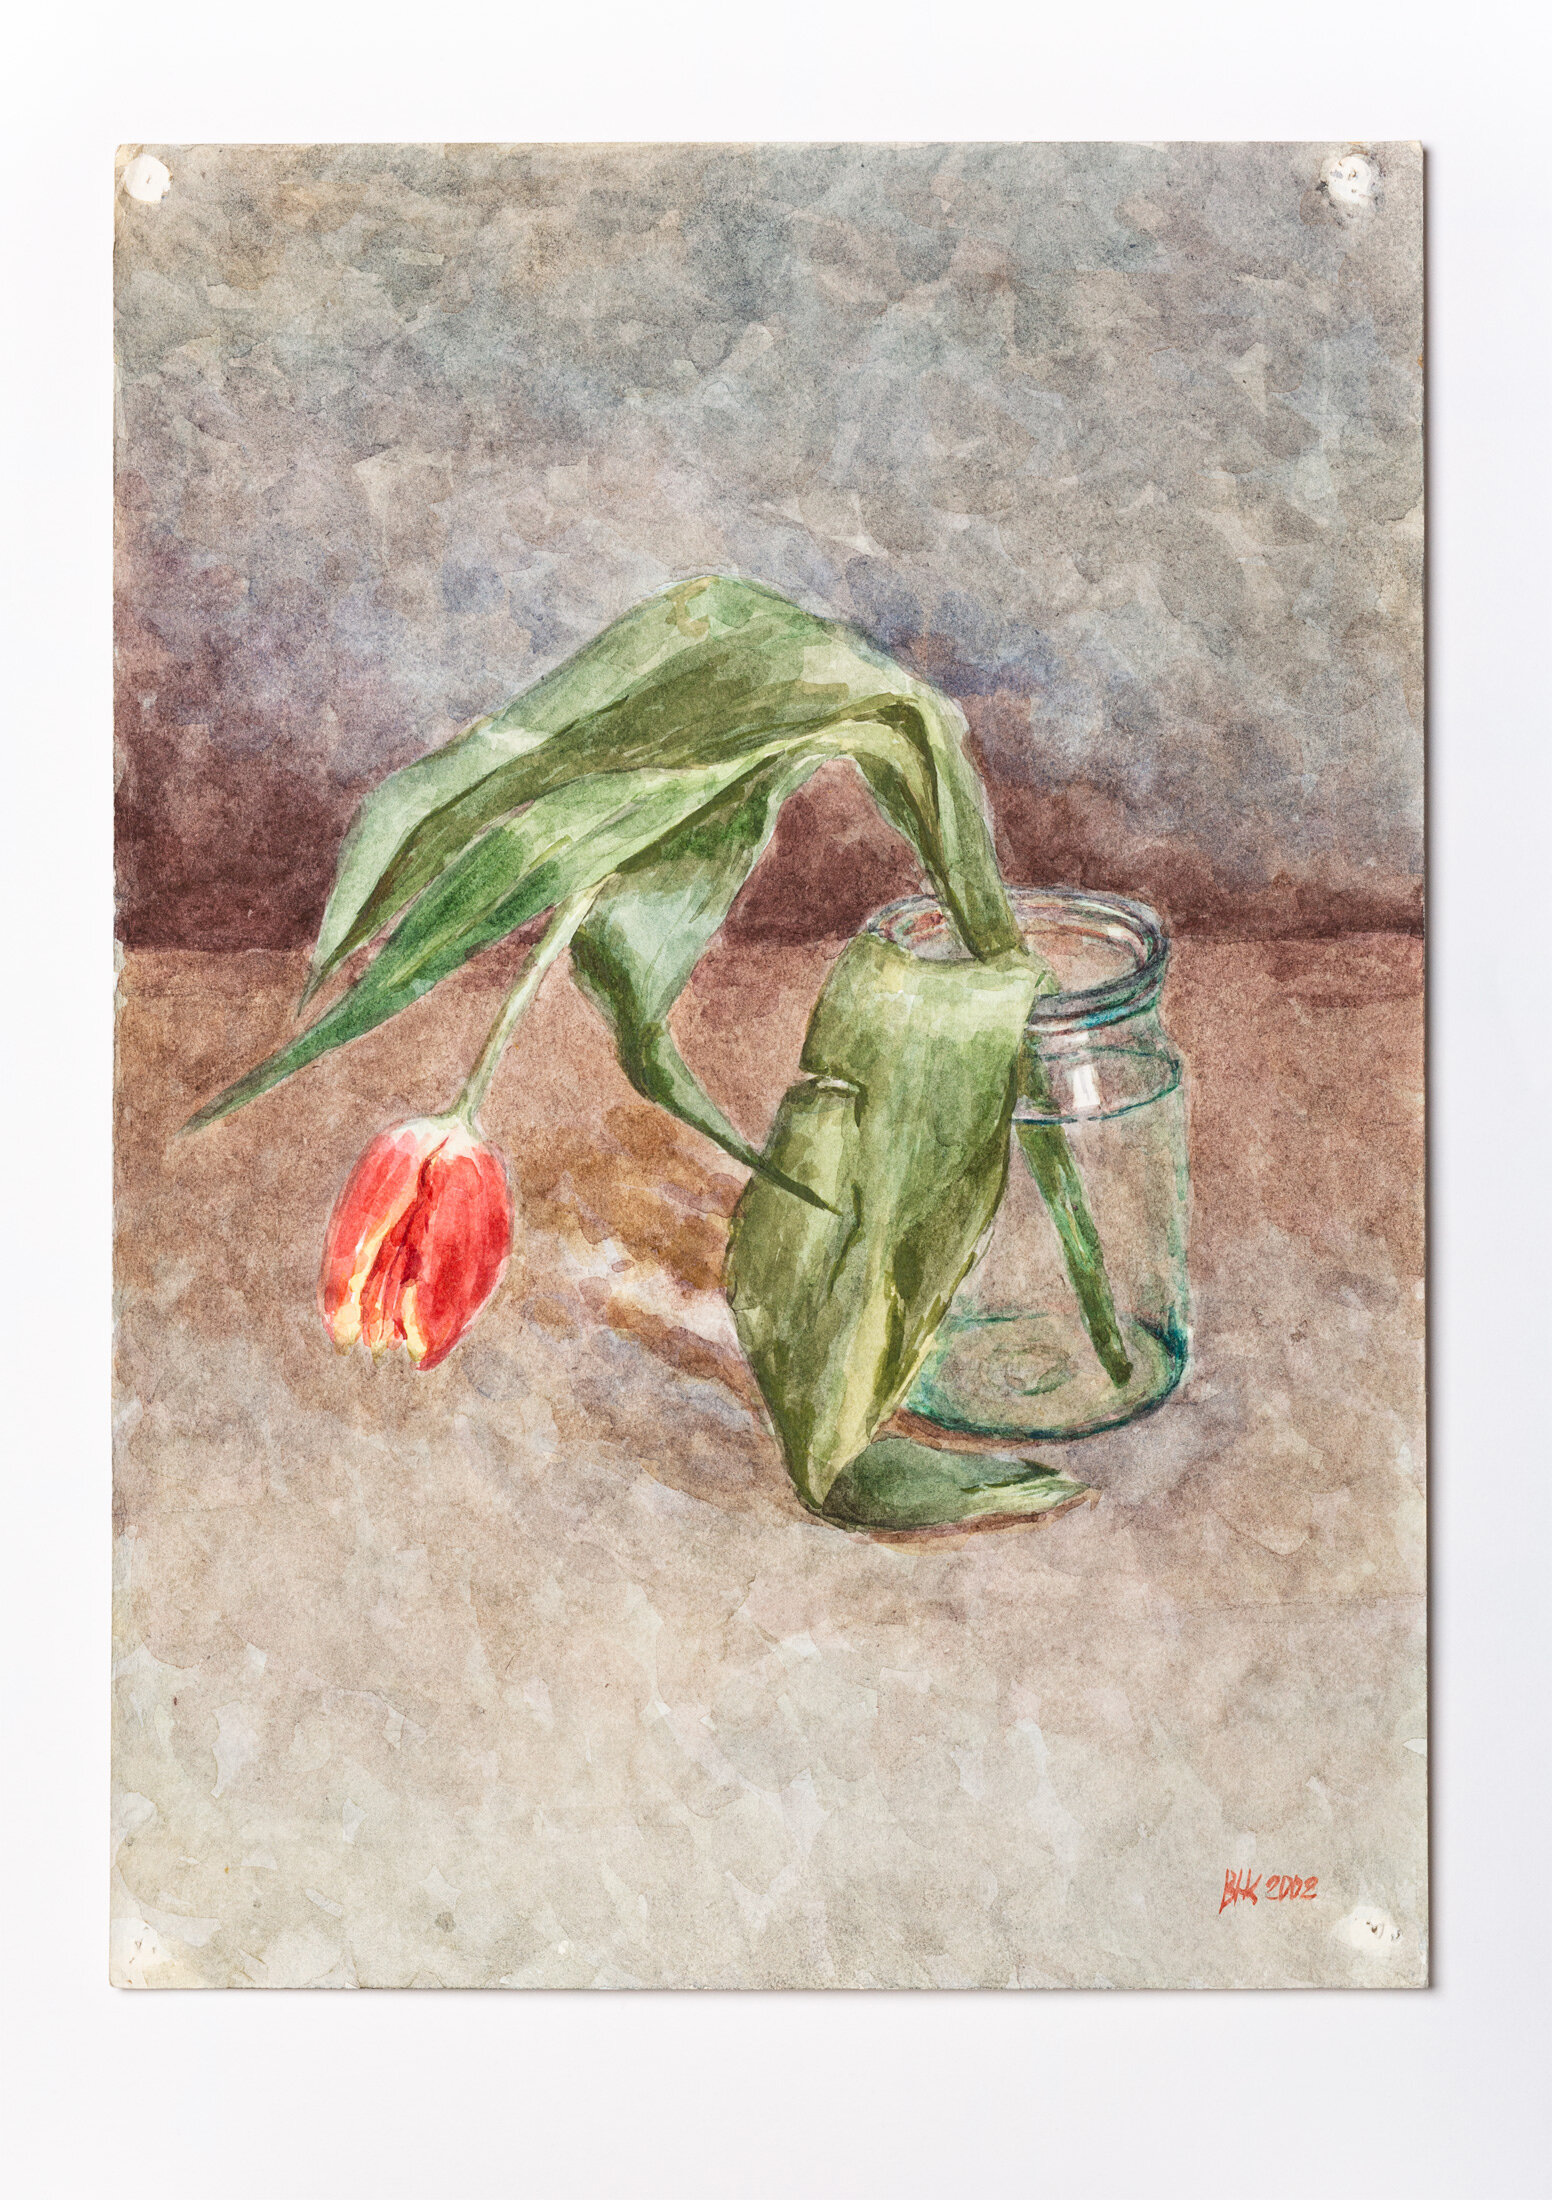 Tulip in a Jar, 2002 - pencil and watercolor on paper